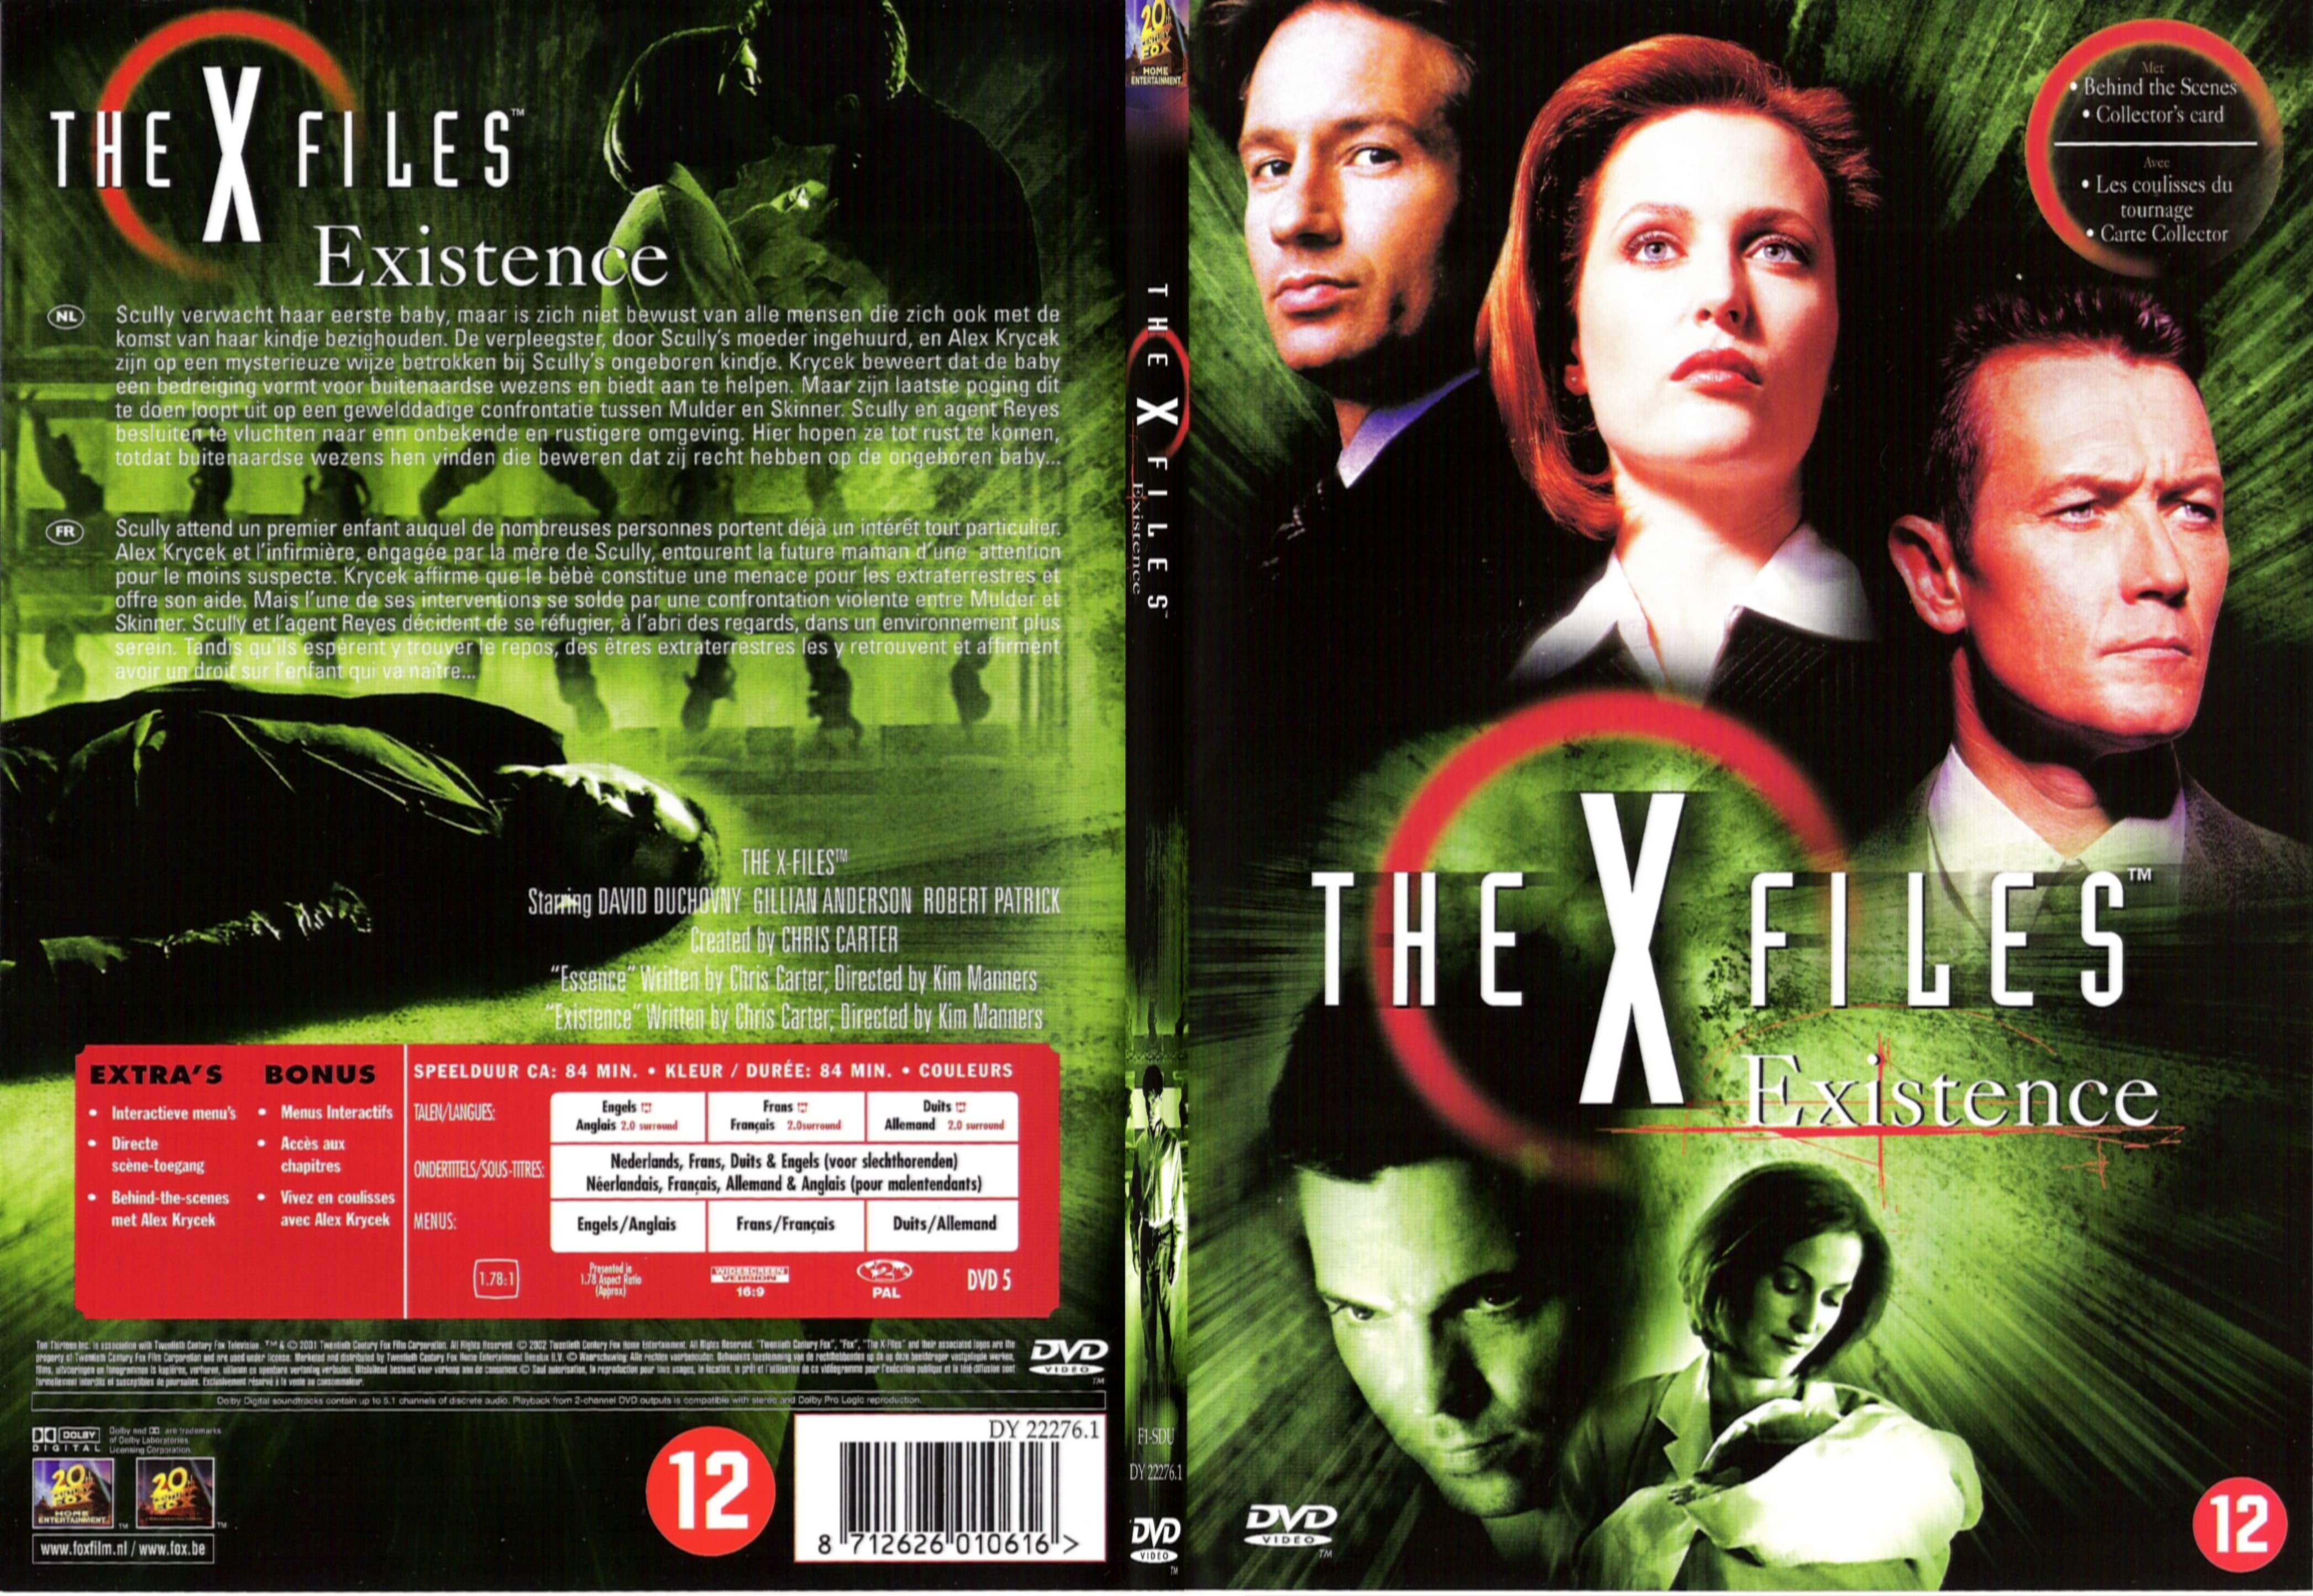 Jaquette DVD X files existence - SLIM